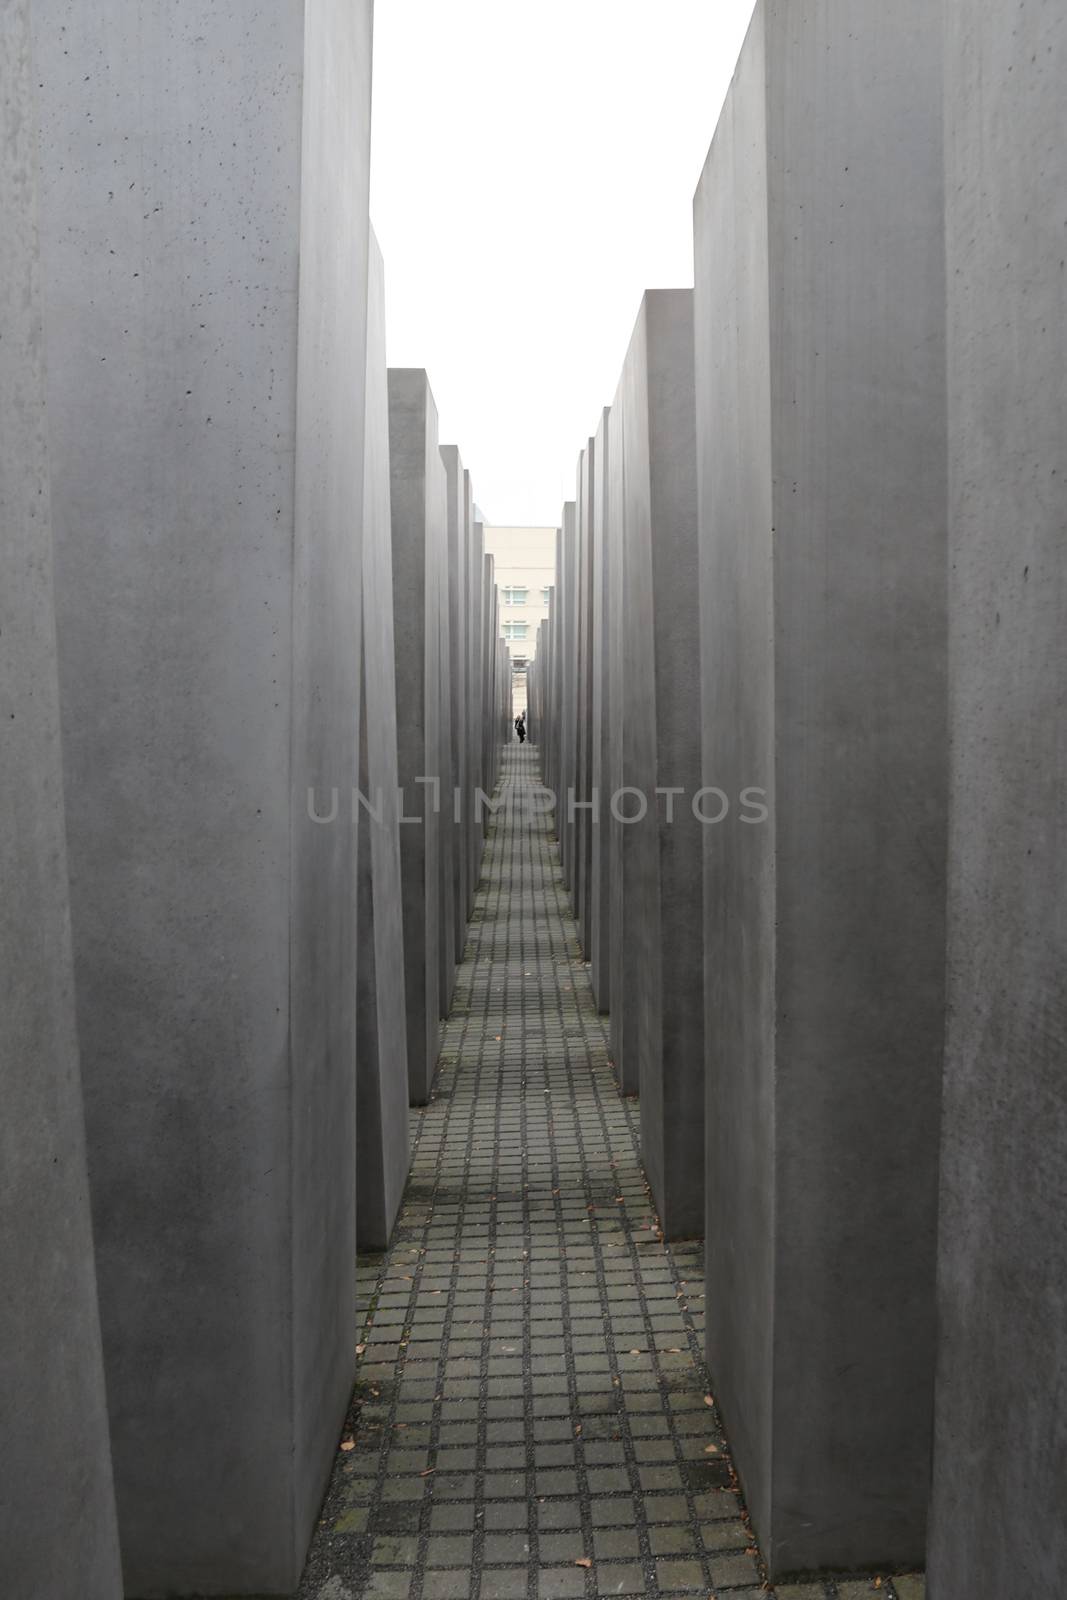 The Memorial to the Murdered Jews of Europe also known as the Holocaust Memorial in Berlin - Germany